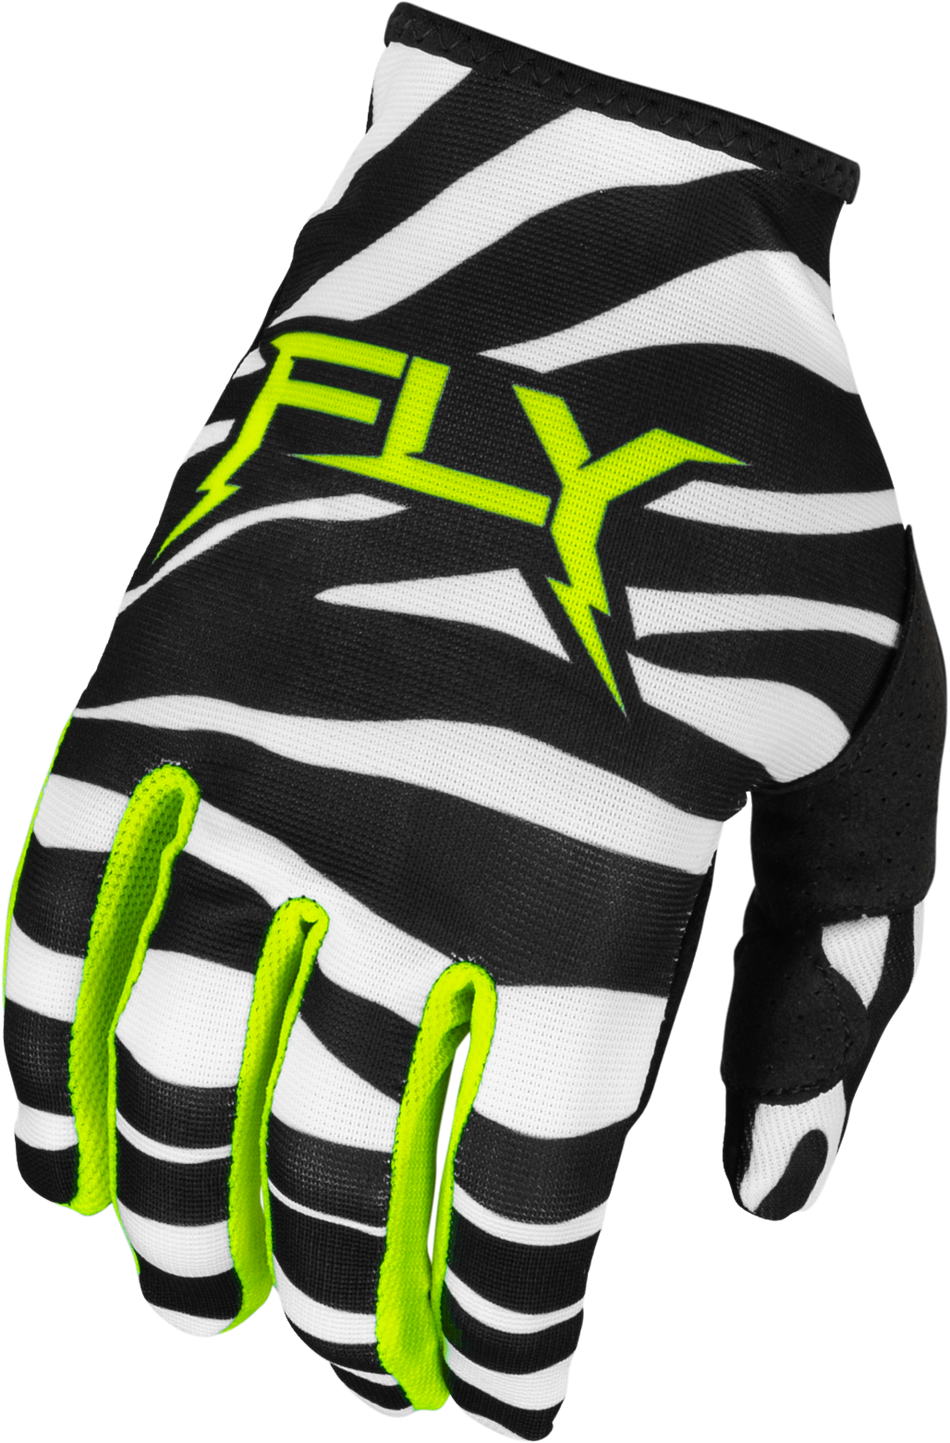 FLY RACING Lite Uncaged Gloves Black/White/Neon Green 2x 377-7422X